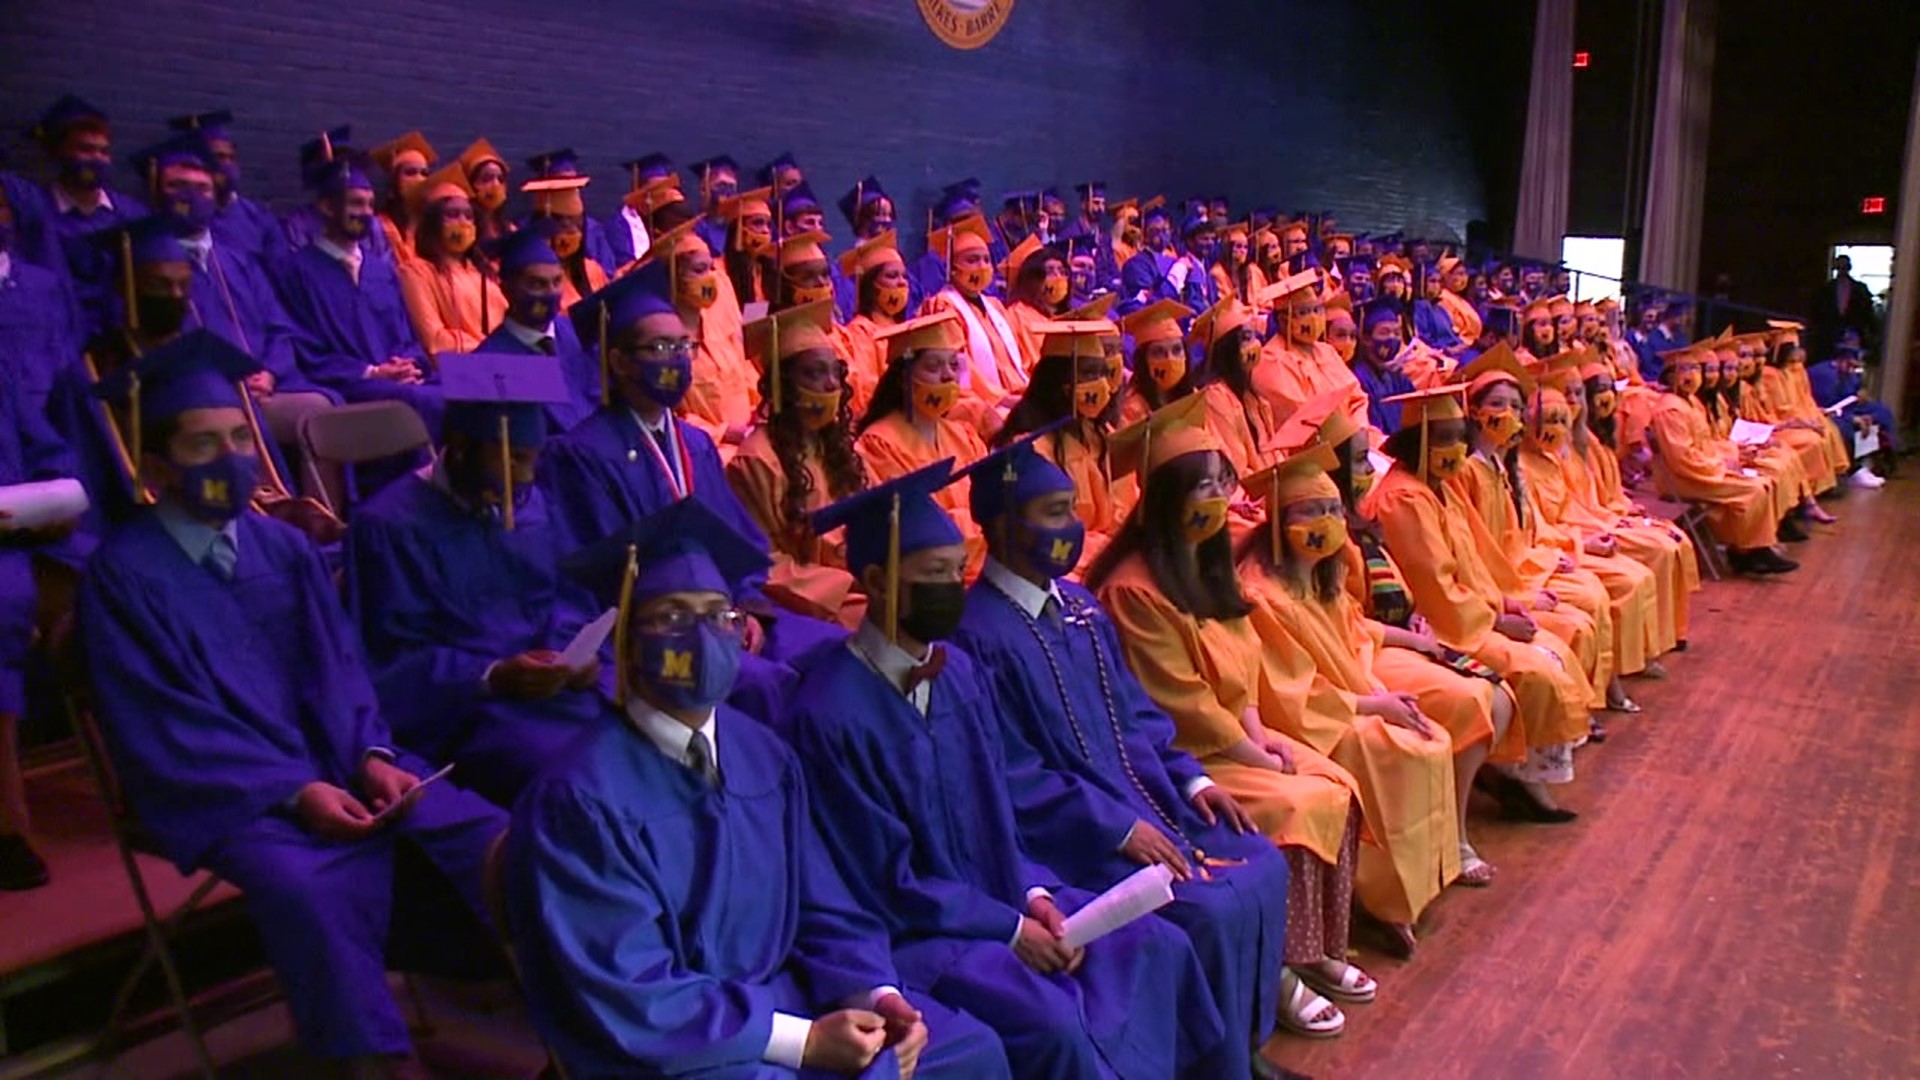 The final graduation ceremonies were held for students of EL Meyers, GAR Memorial, and James M. Coughlin High Schools in Wilkes-Barre.